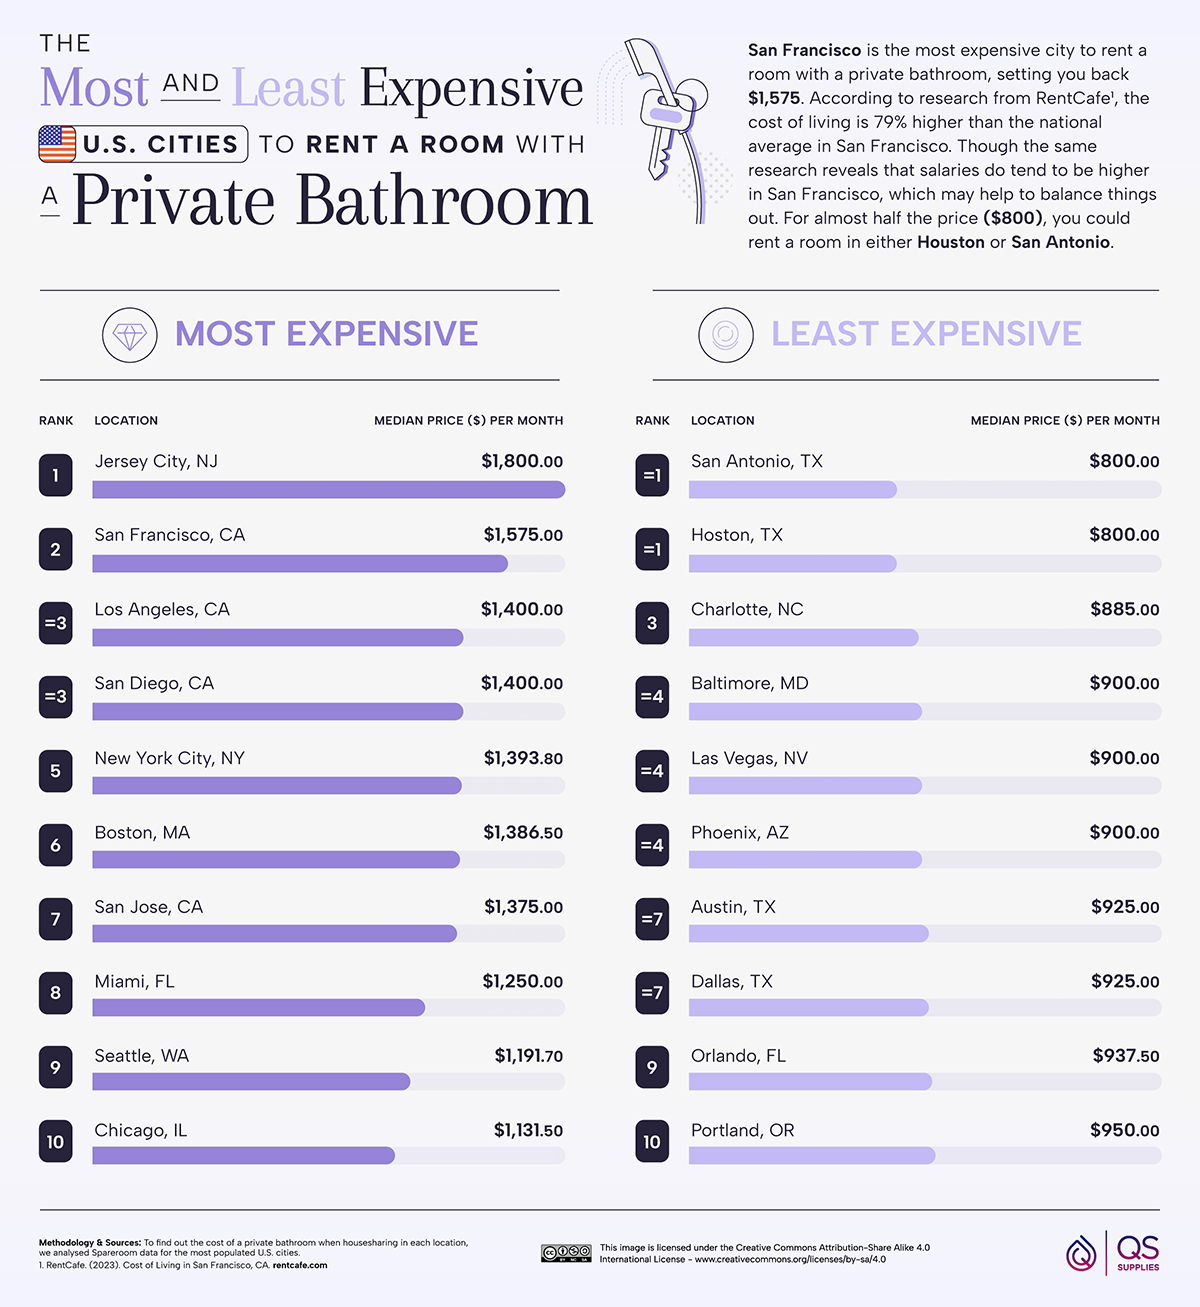 Most and Least Expensive US Cities To Rent A Room With A Private Bathroom